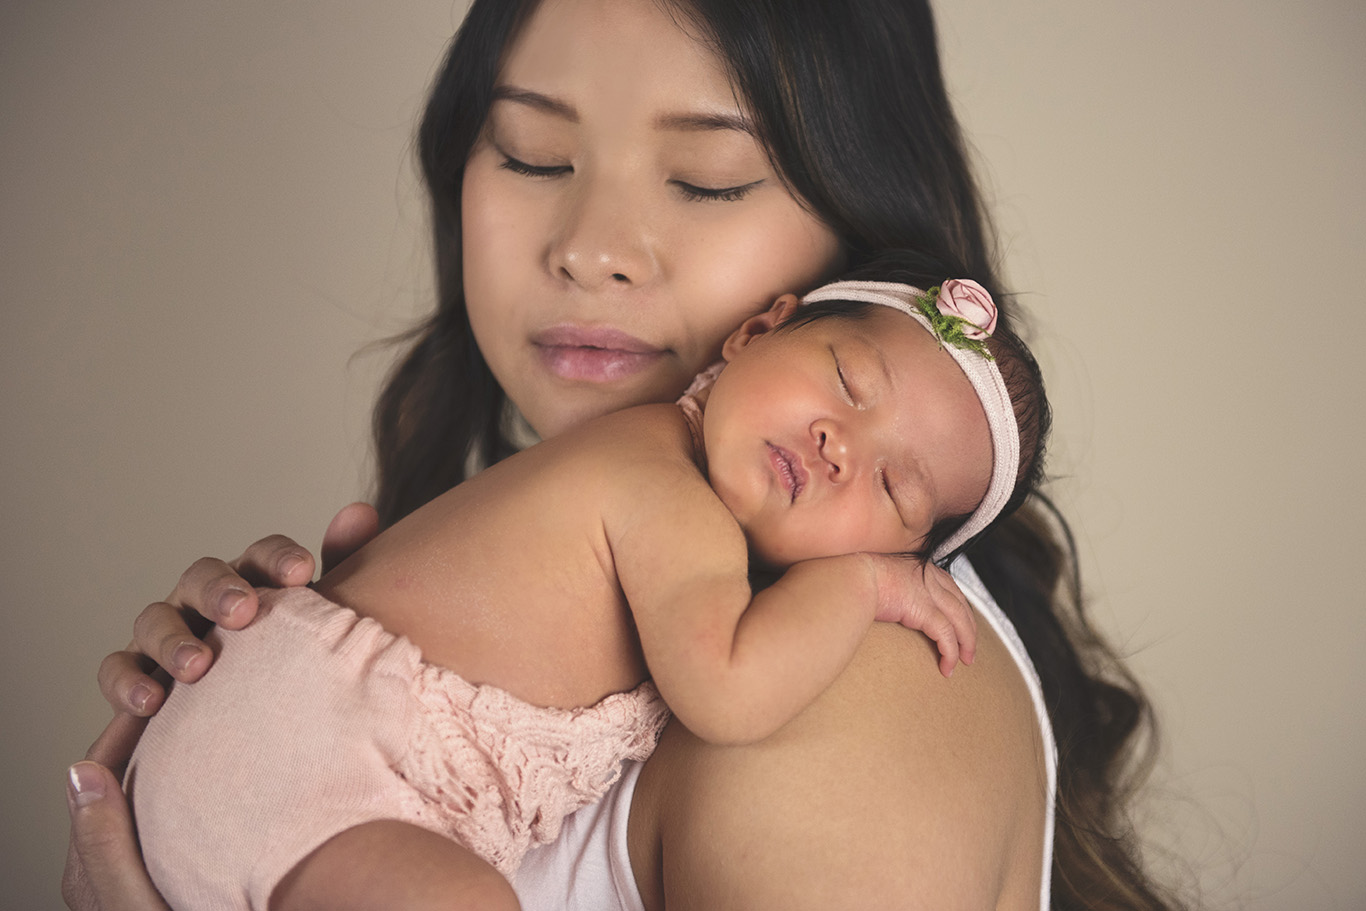 What to expect during a newborn session